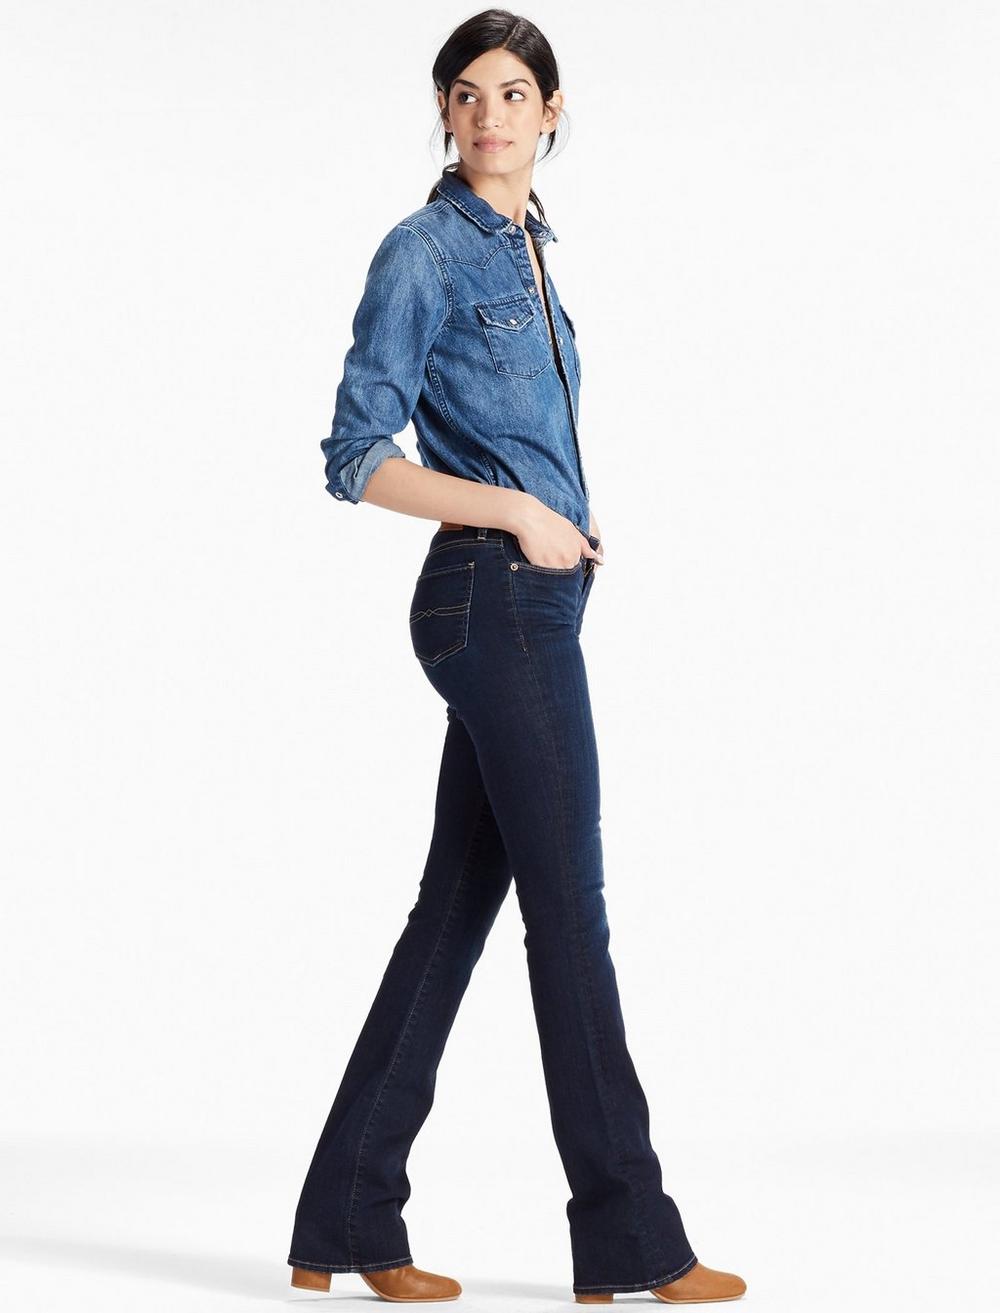 SWEET MID RISE BOOT JEAN, image 2